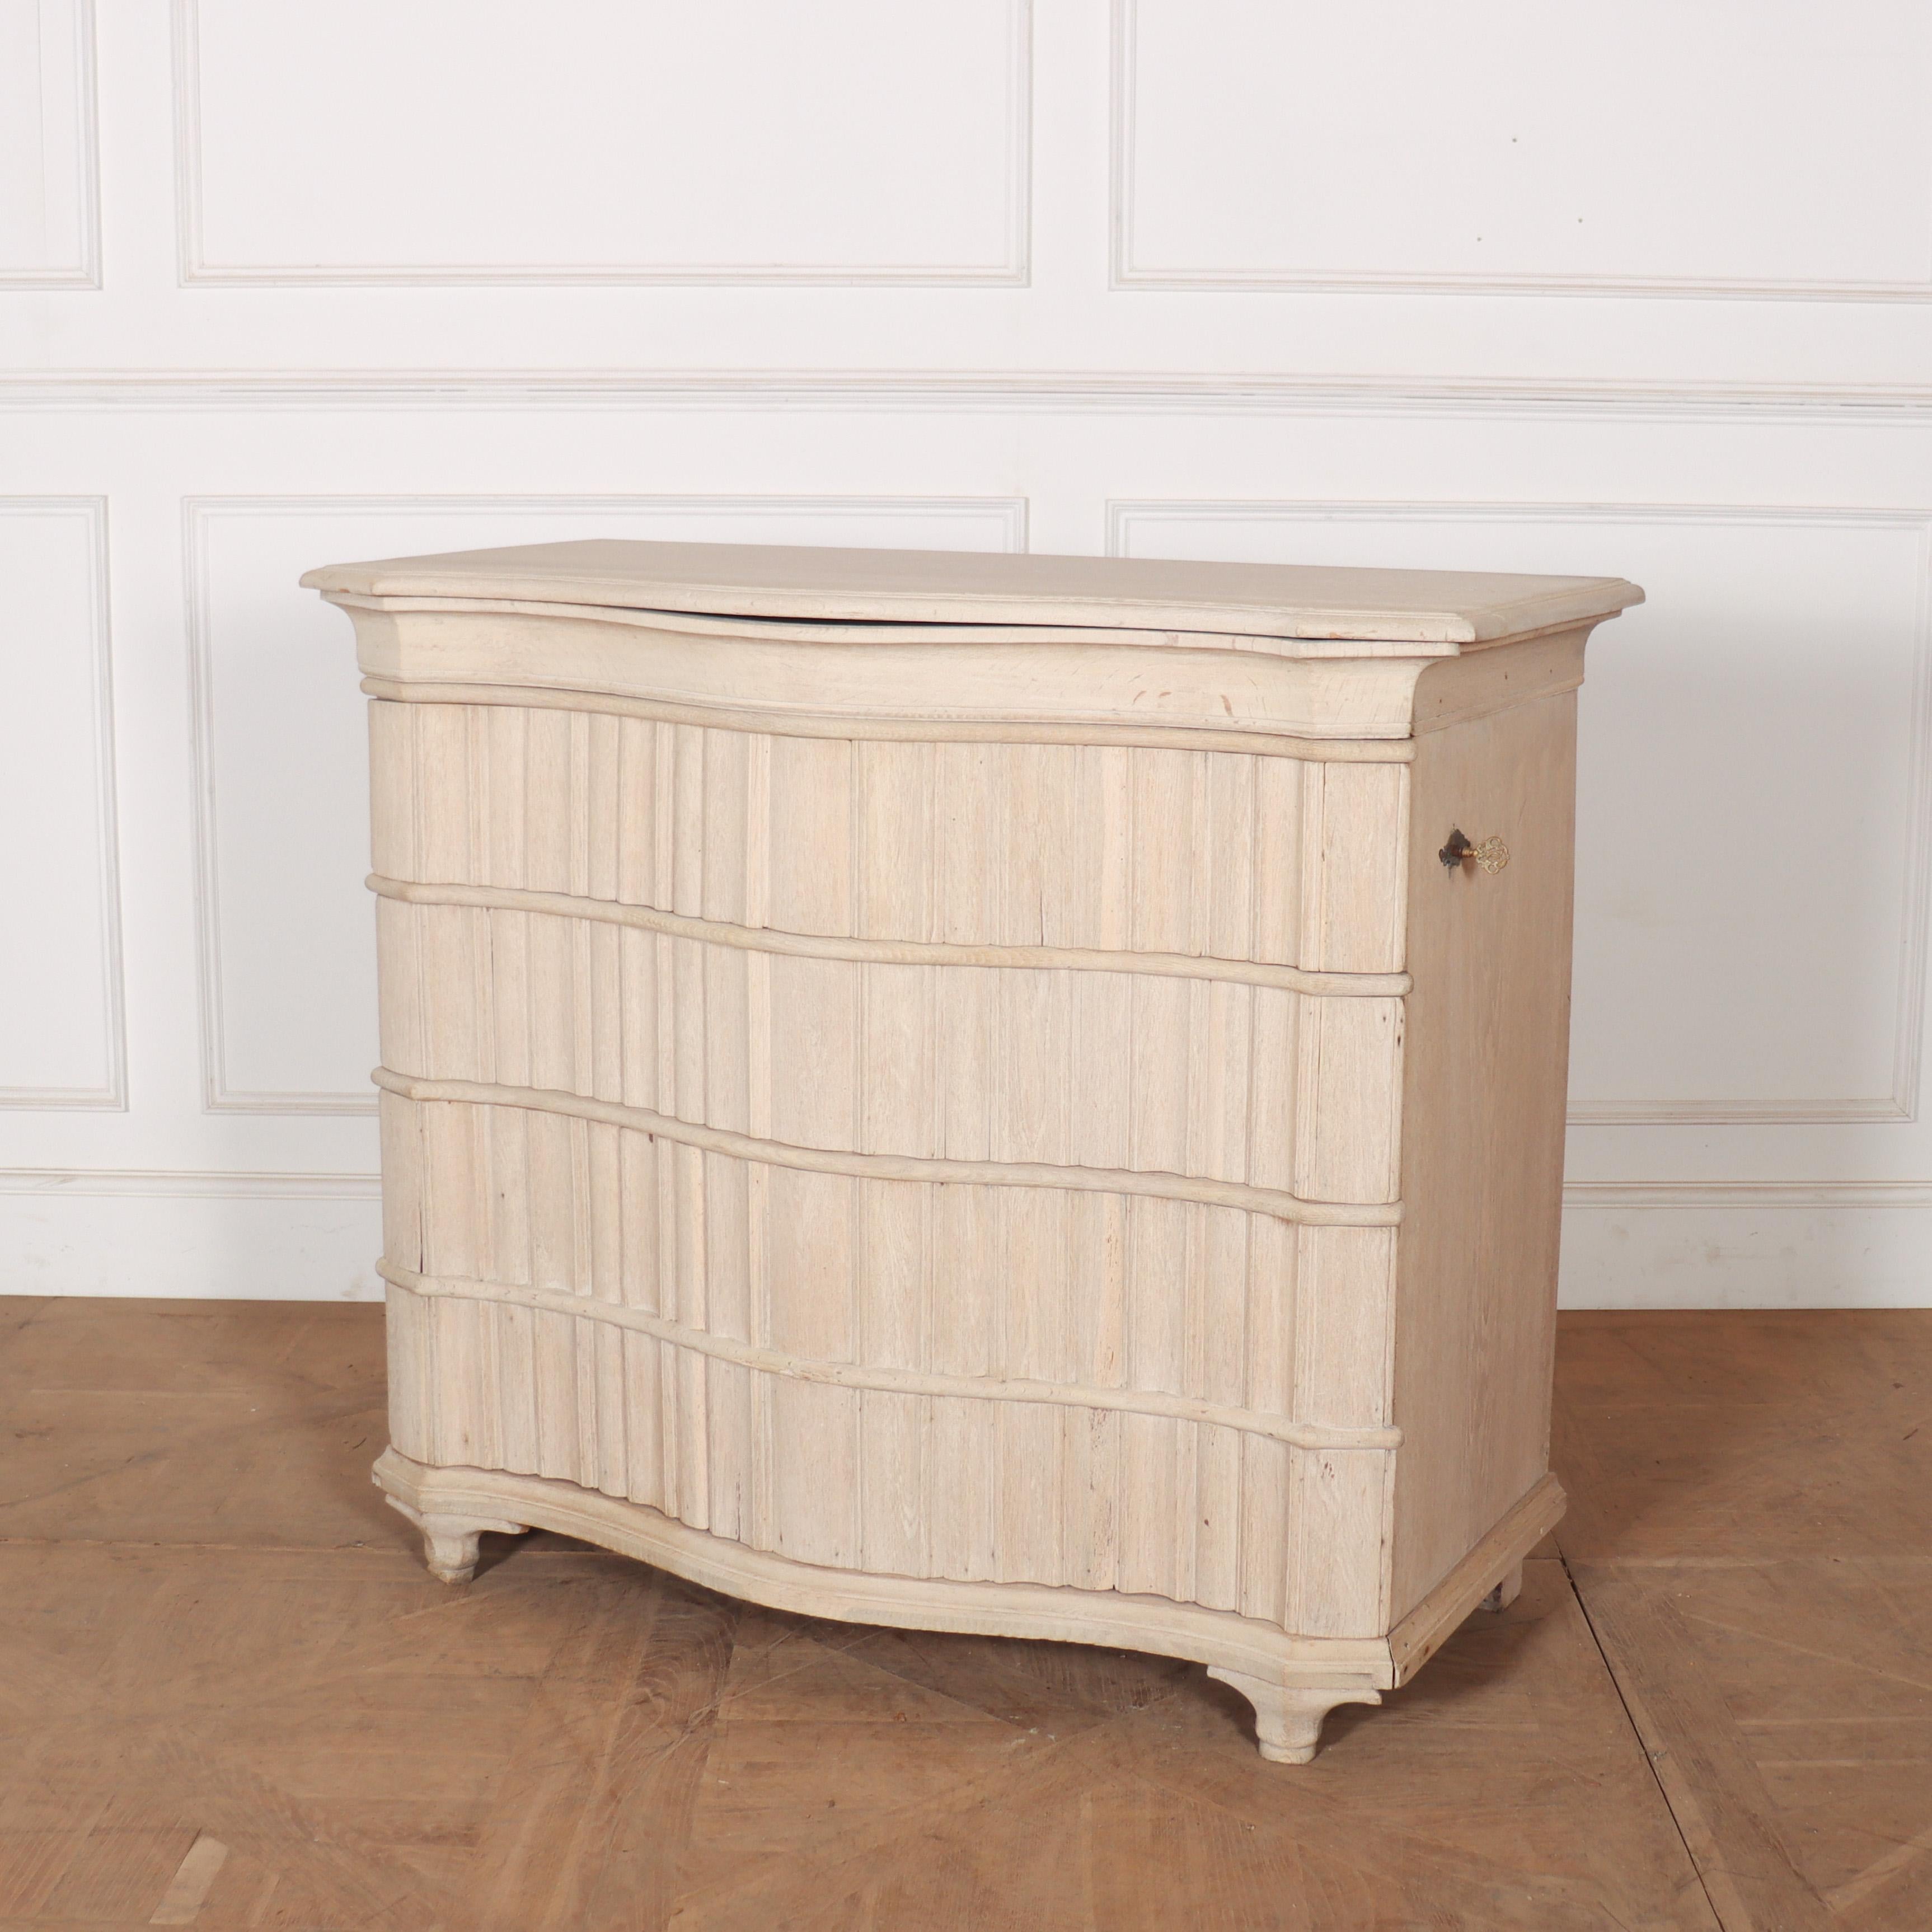 Very unusual 18th C Austrian bleached oak commode. 1780.

Reference: 8171

Dimensions
47.5 inches (121 cms) Wide
23.5 inches (60 cms) Deep
39.5 inches (100 cms) High